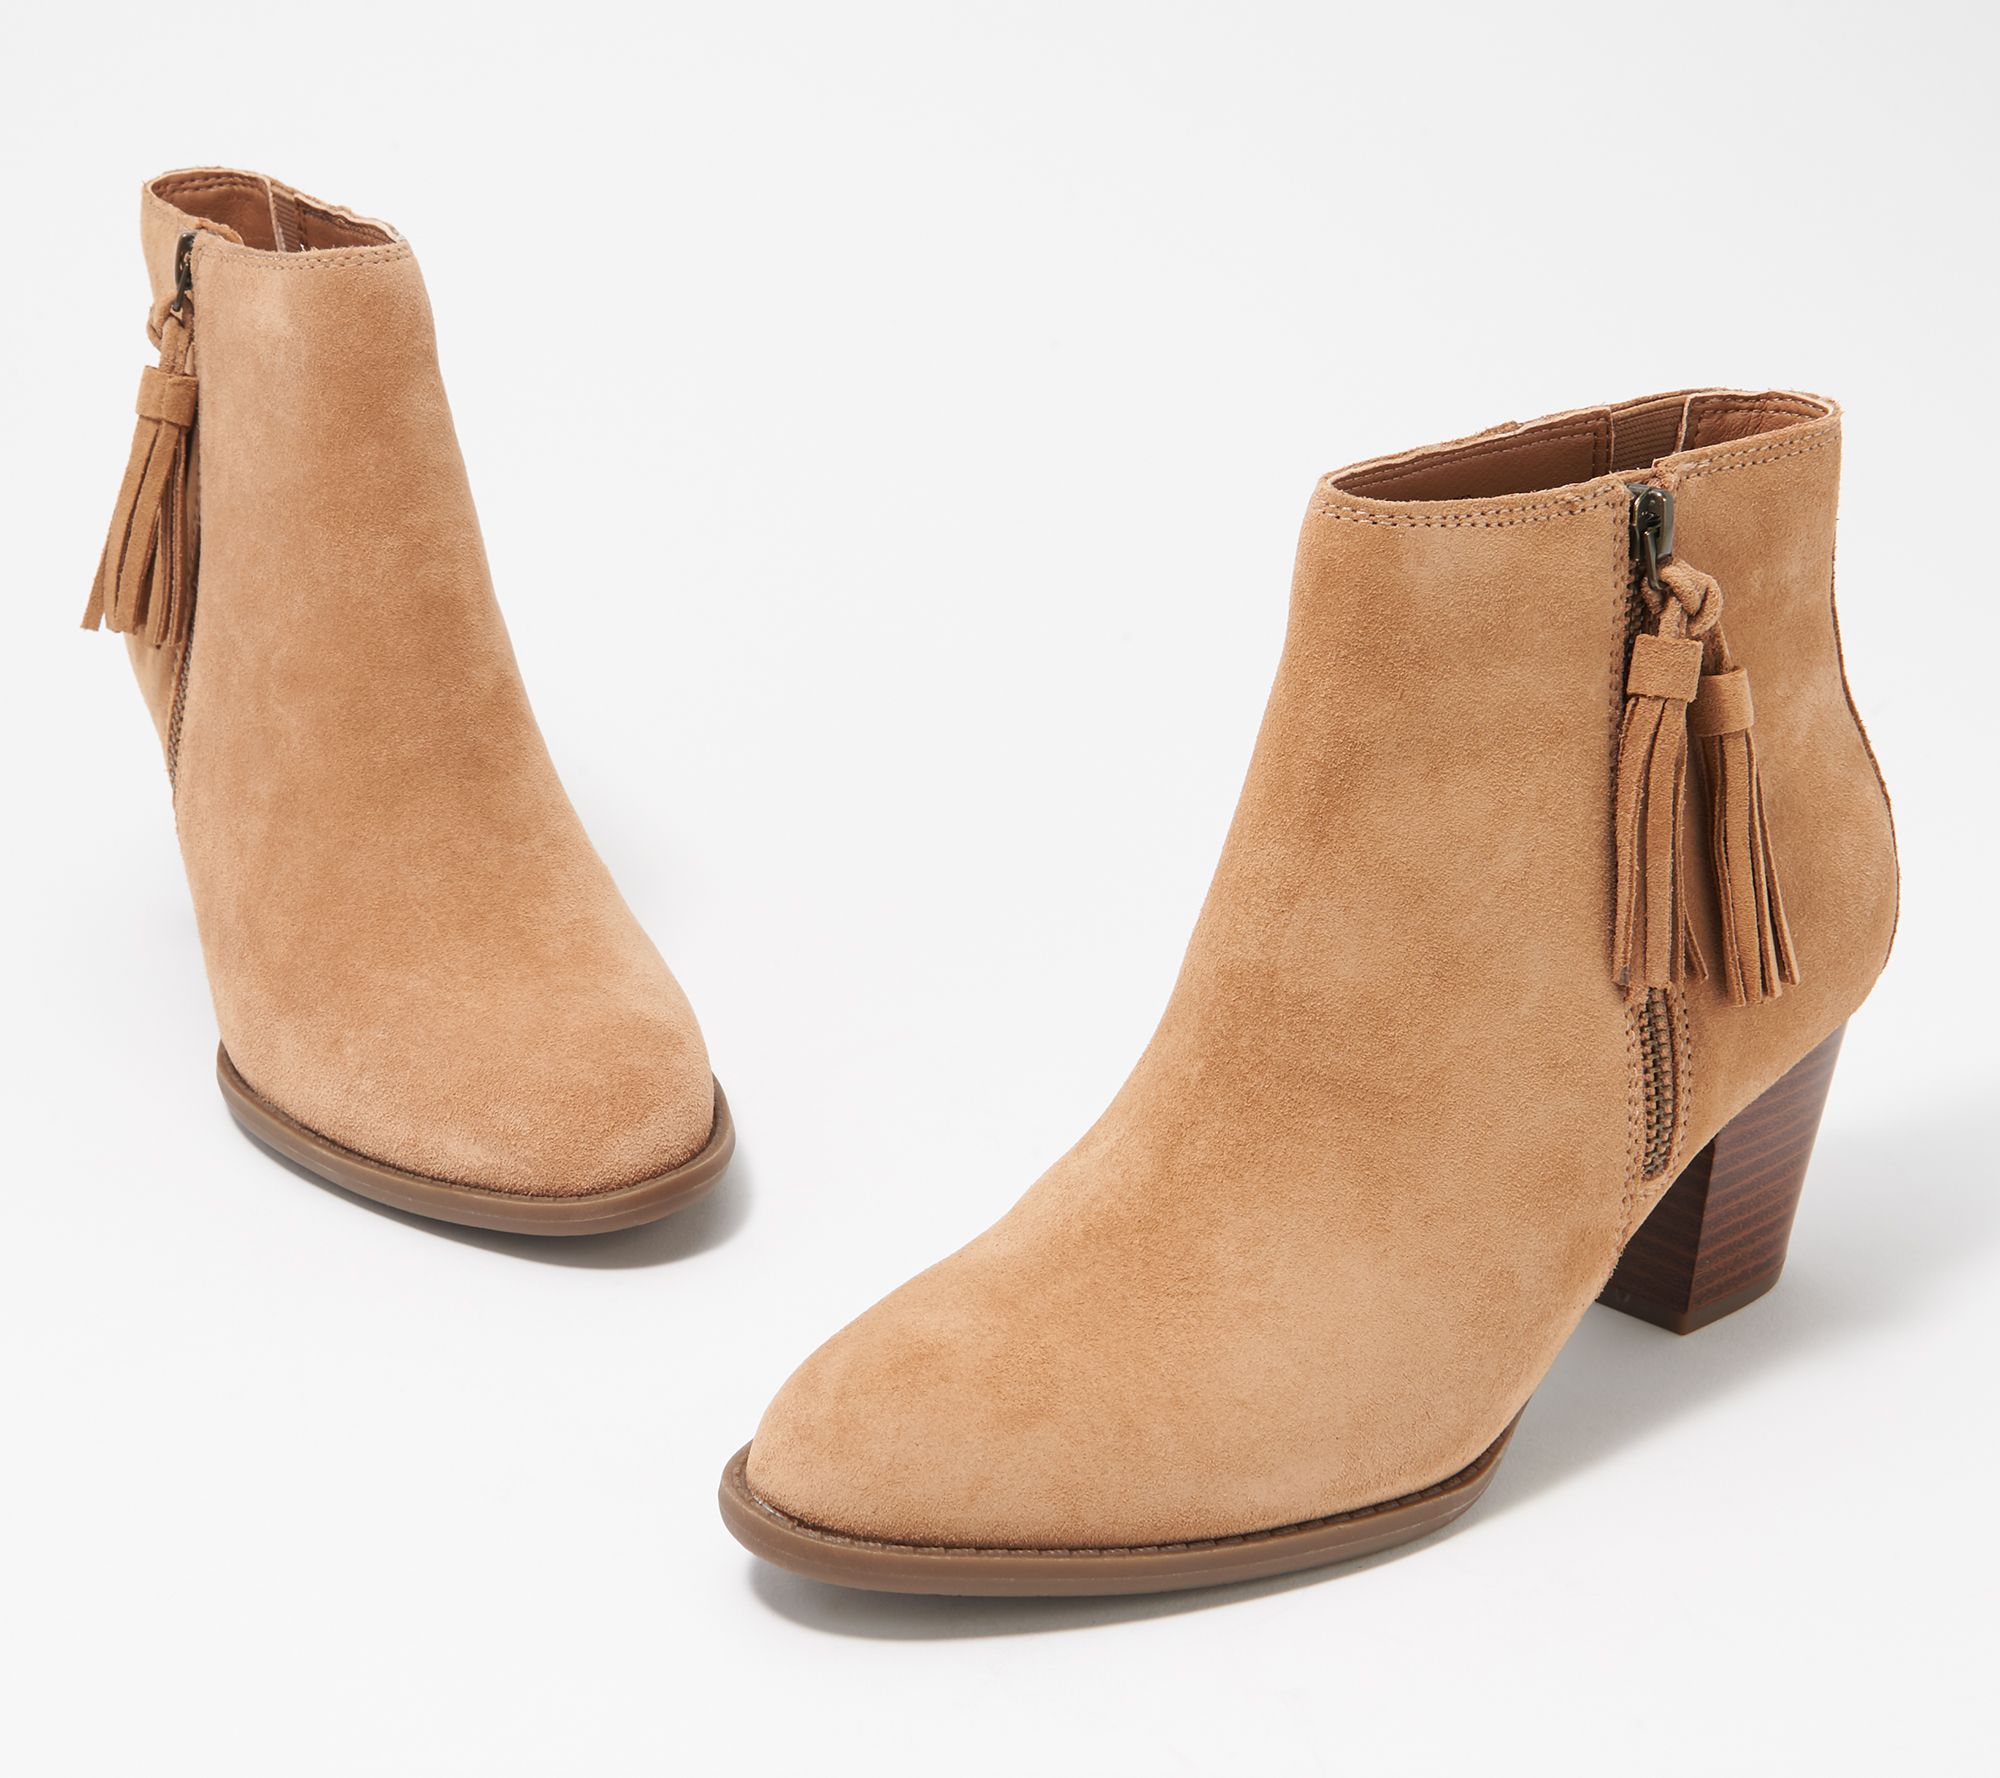 Vionic Leather Tassel Ankle Boots - Madeline - QVC.com